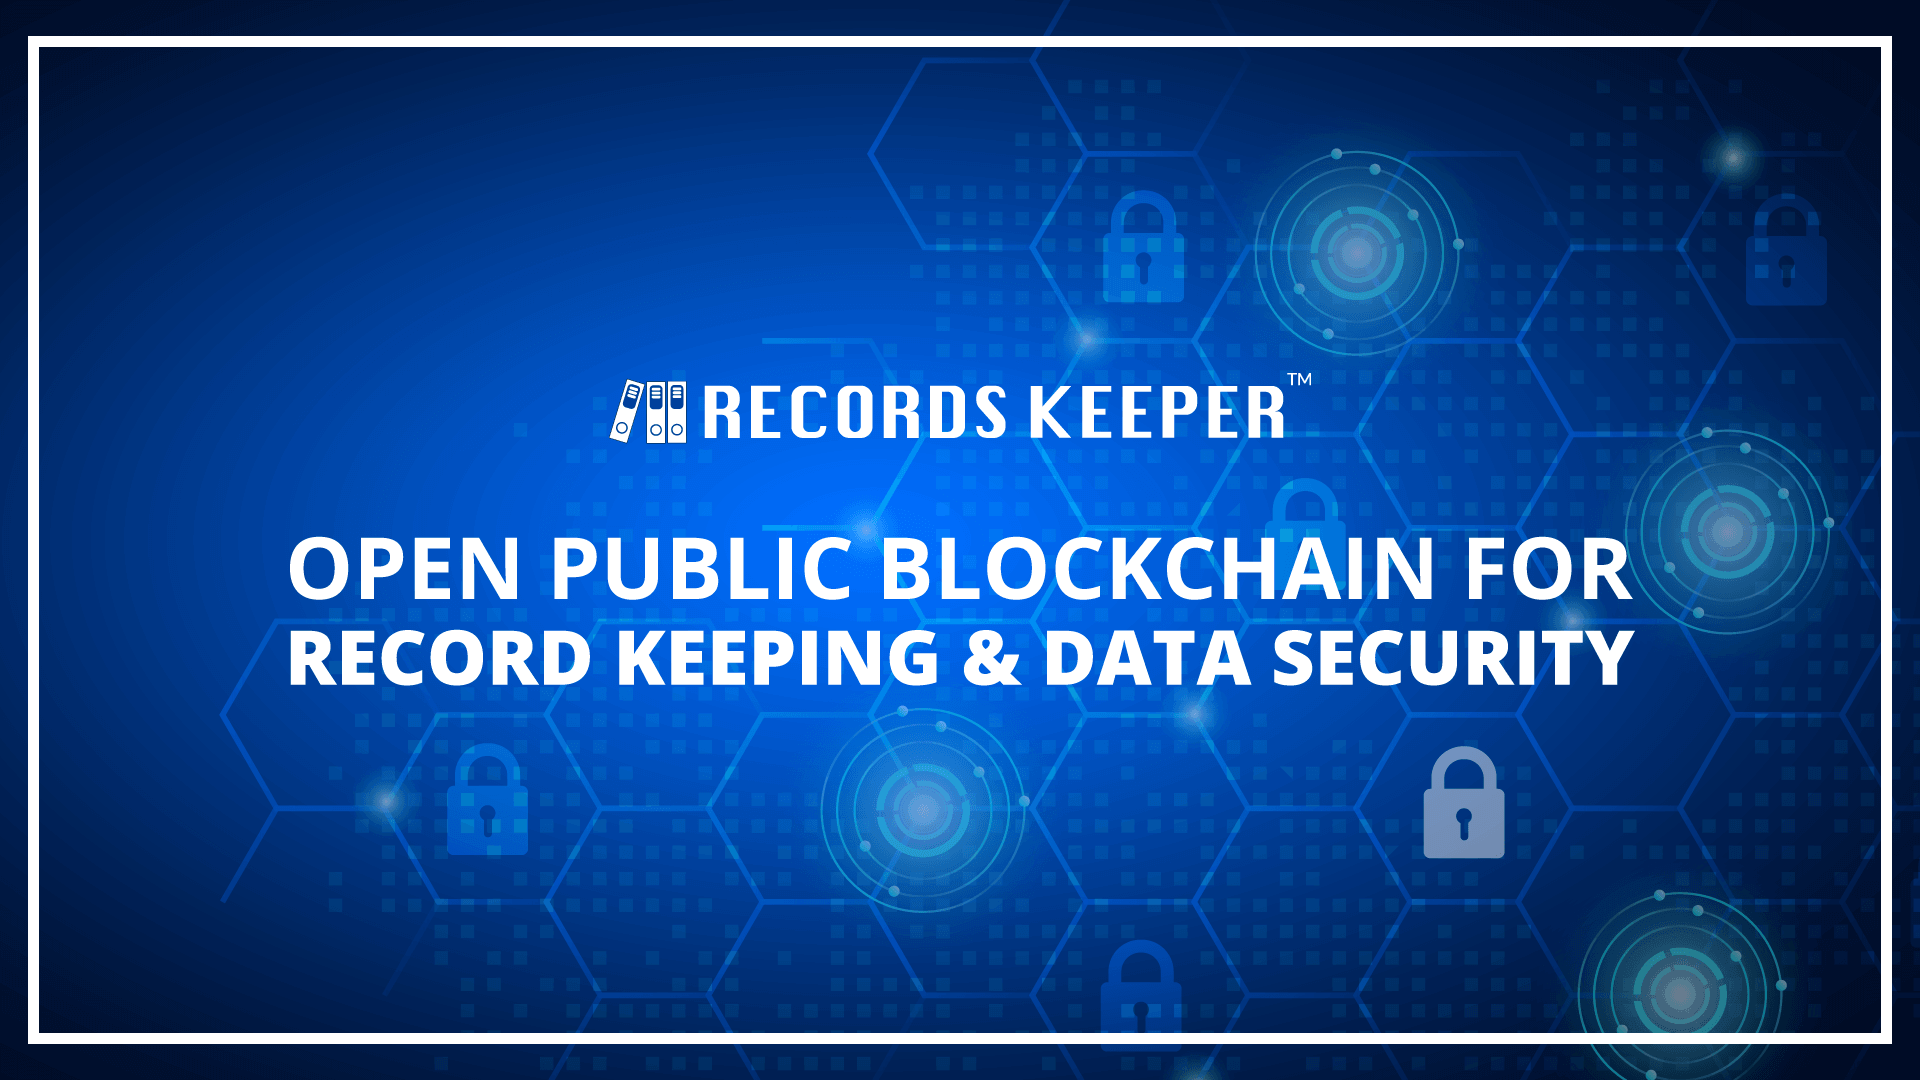 RecordsKeeper Token Distribution Cancellation Announcement